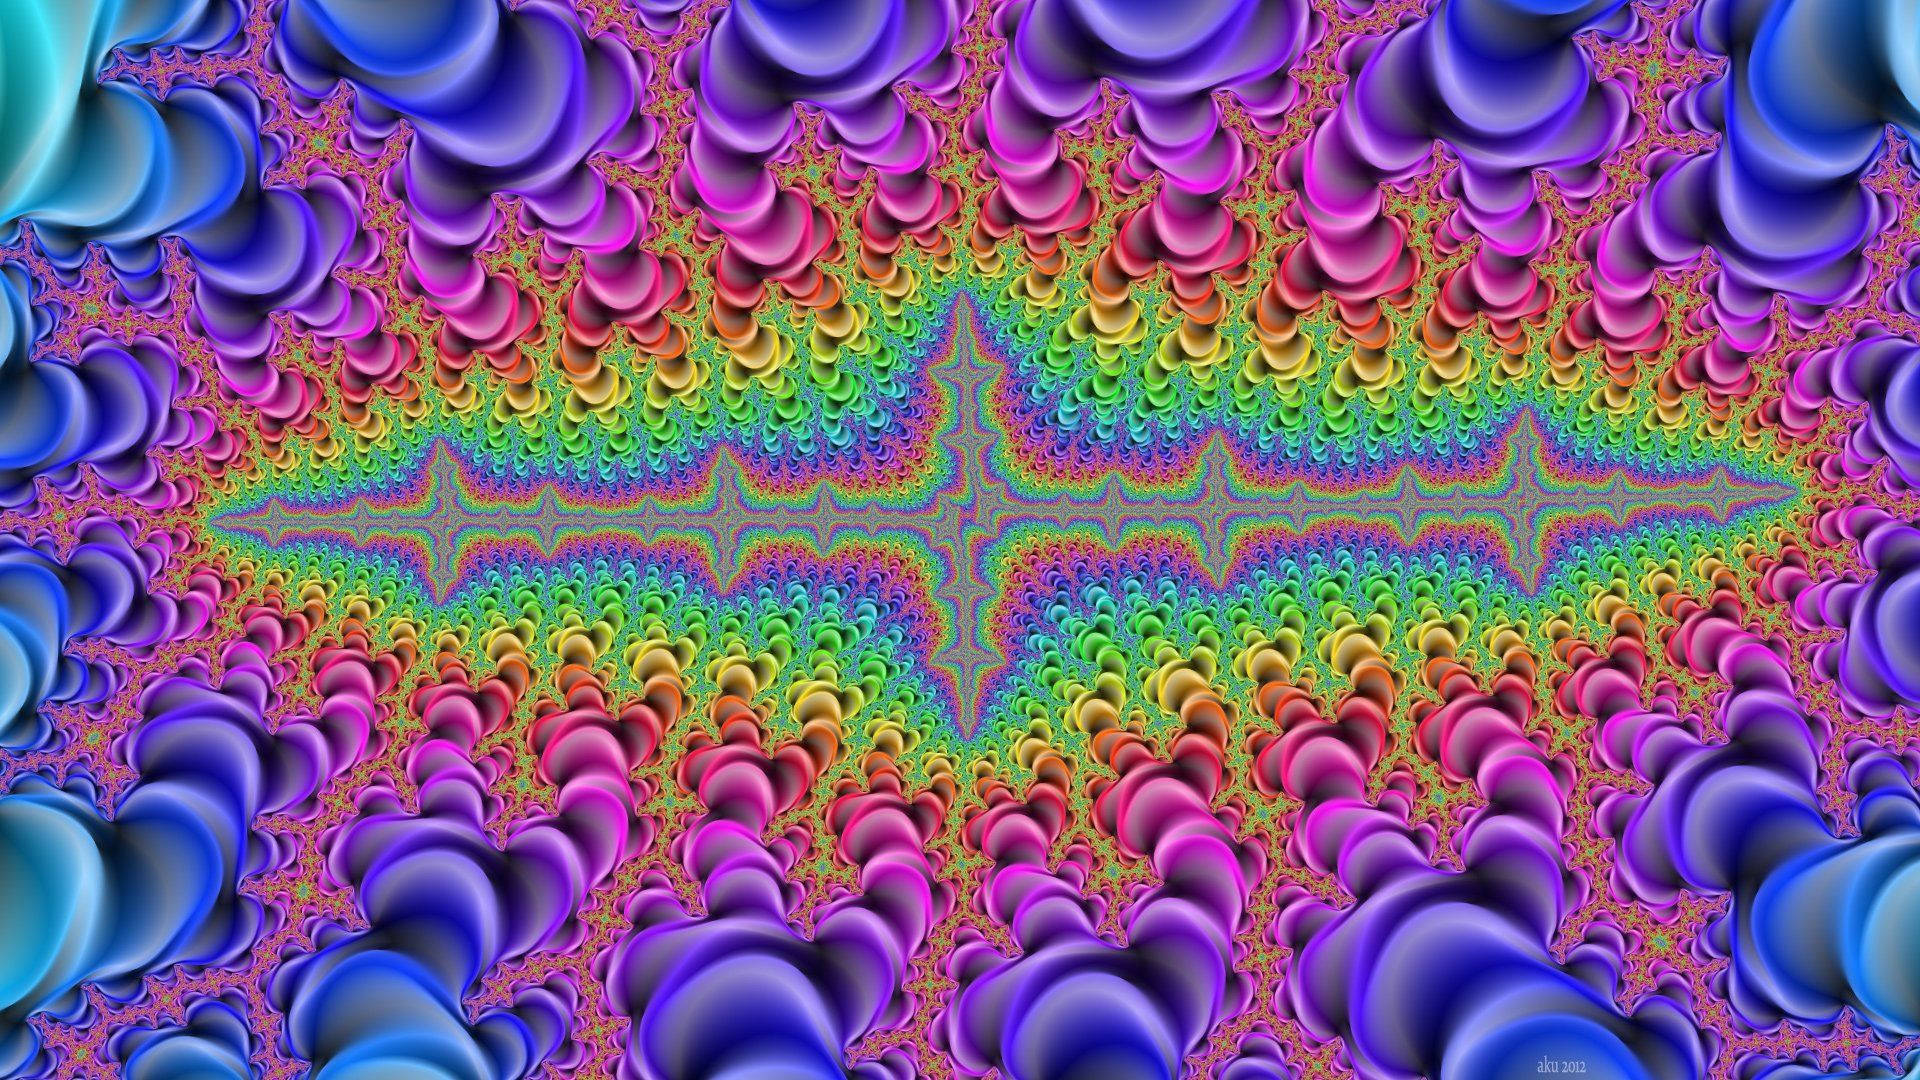 Pink and purple gradient abstract psychedelic art wallpaper.